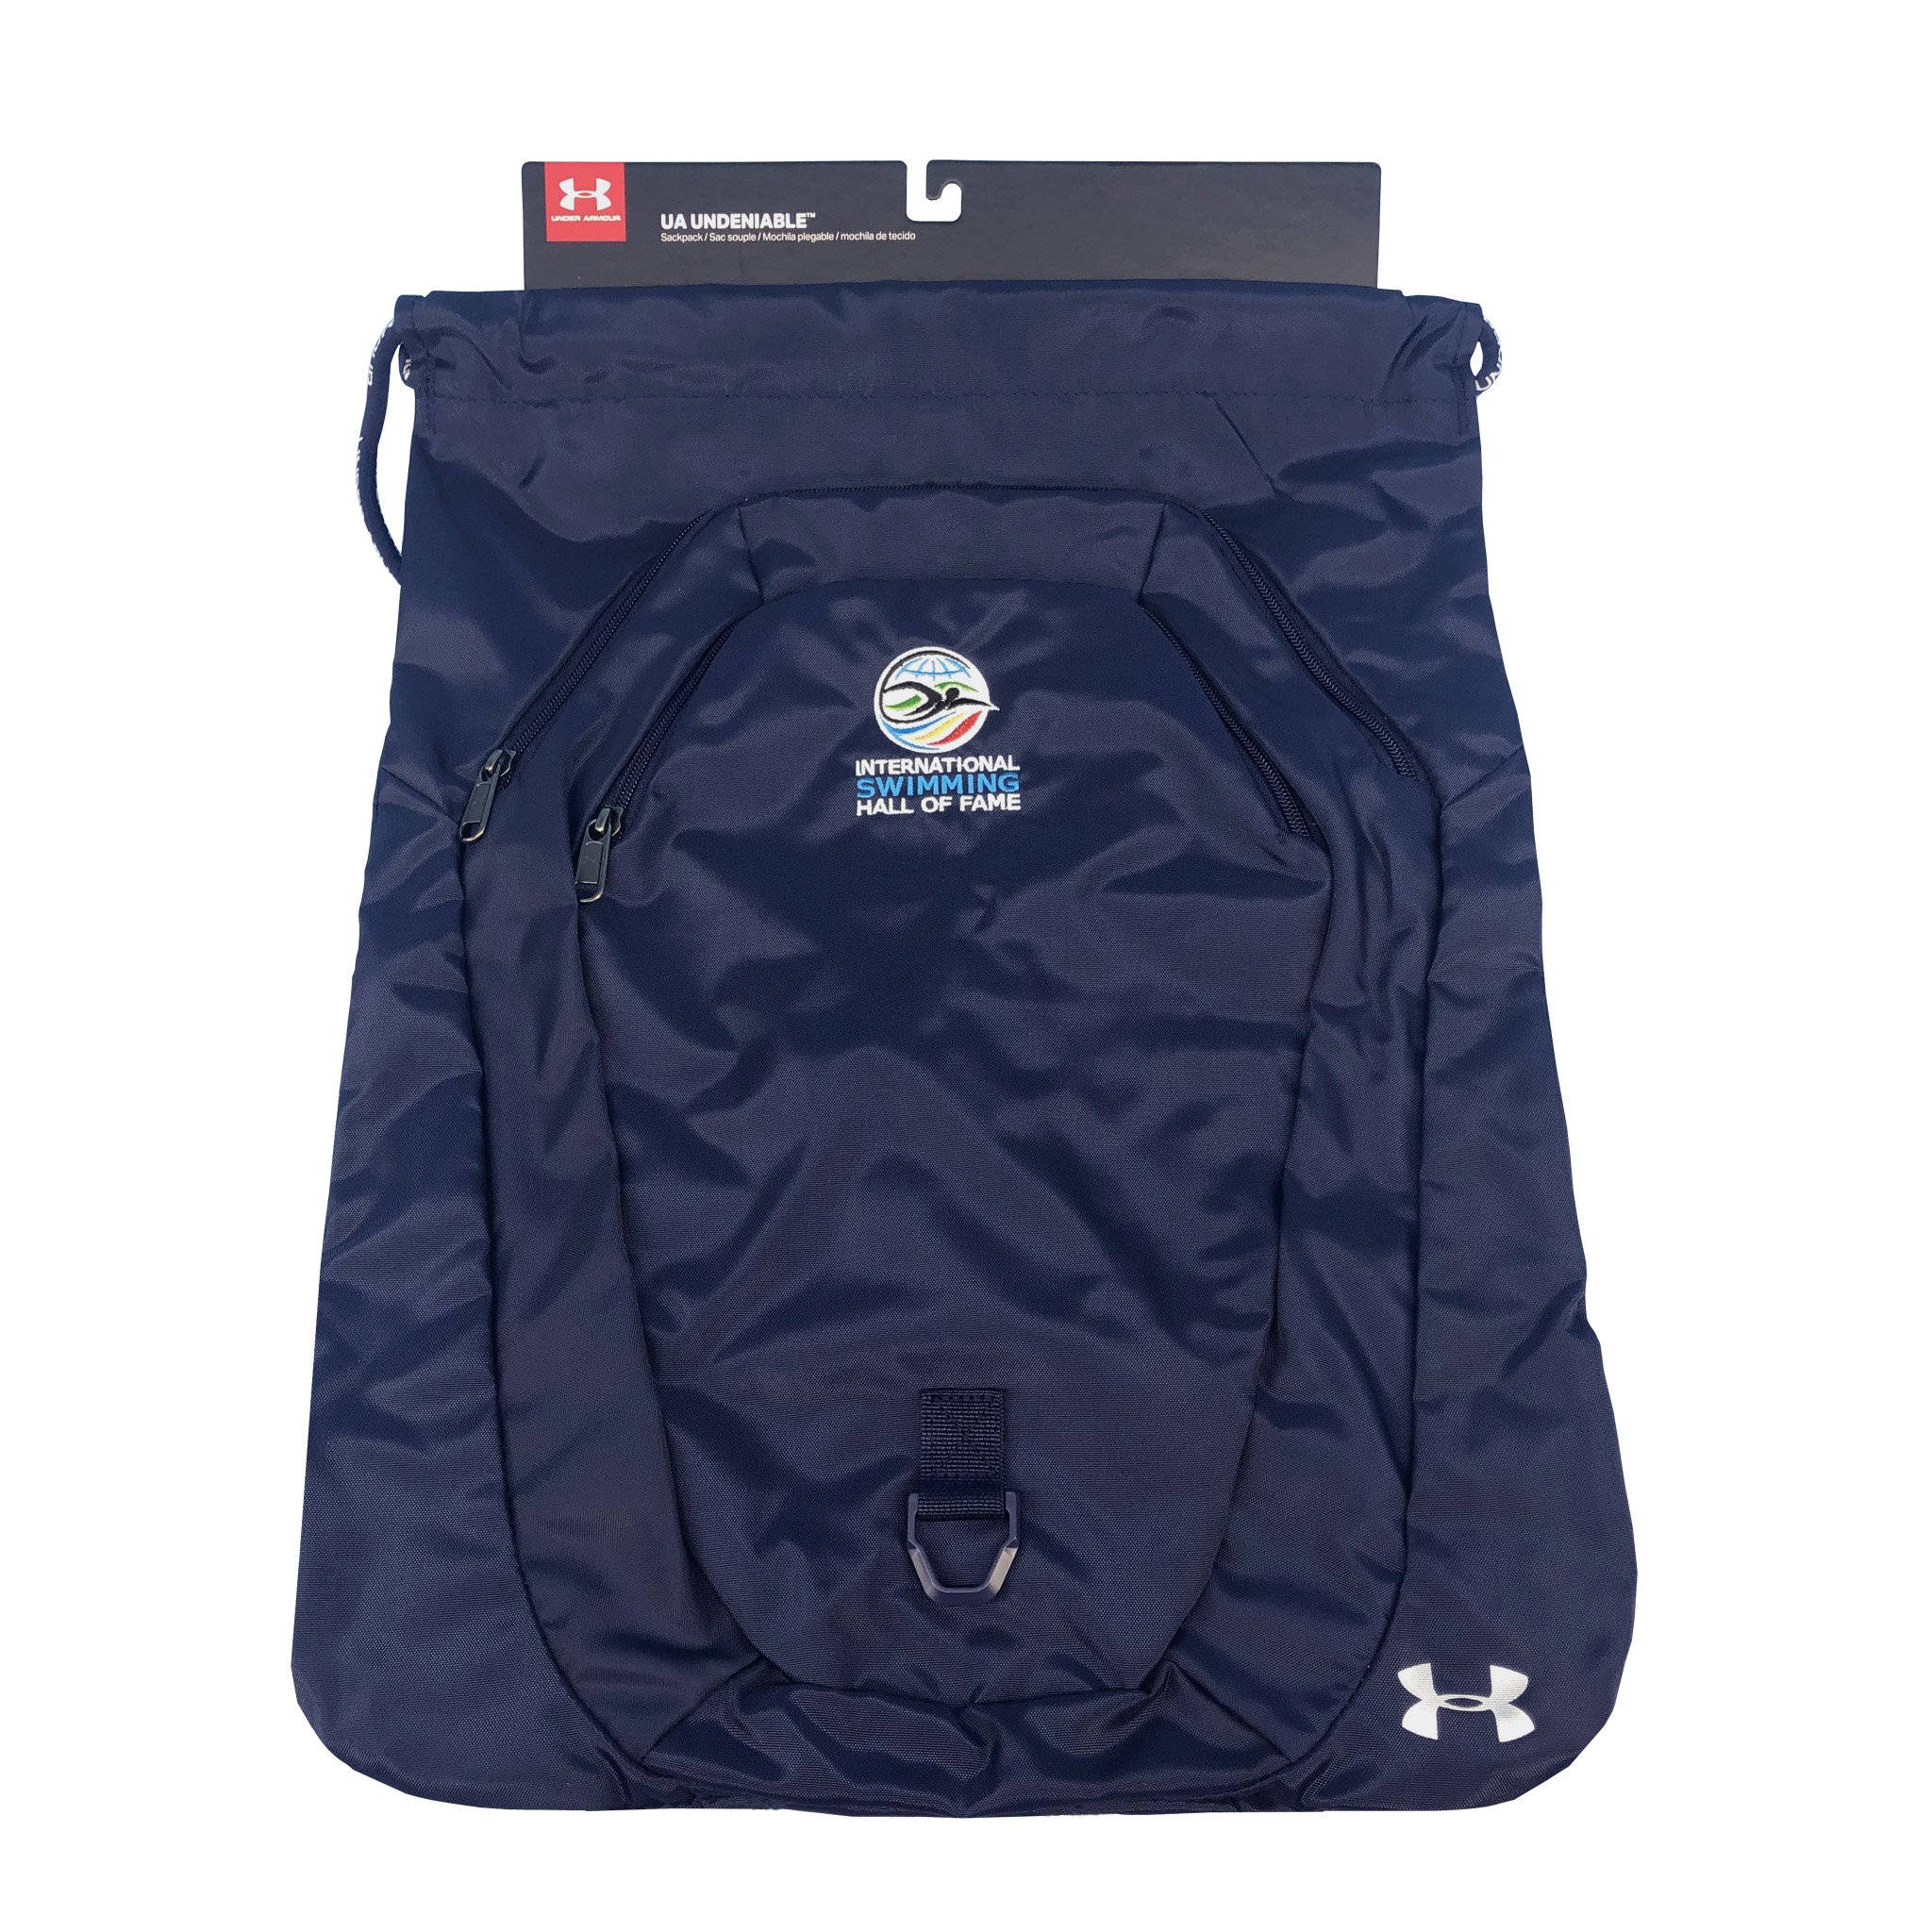 under_armor_new_logo_ishof_backpack_swimming_hall_of_fame_museum_swimming_world_2048x2048